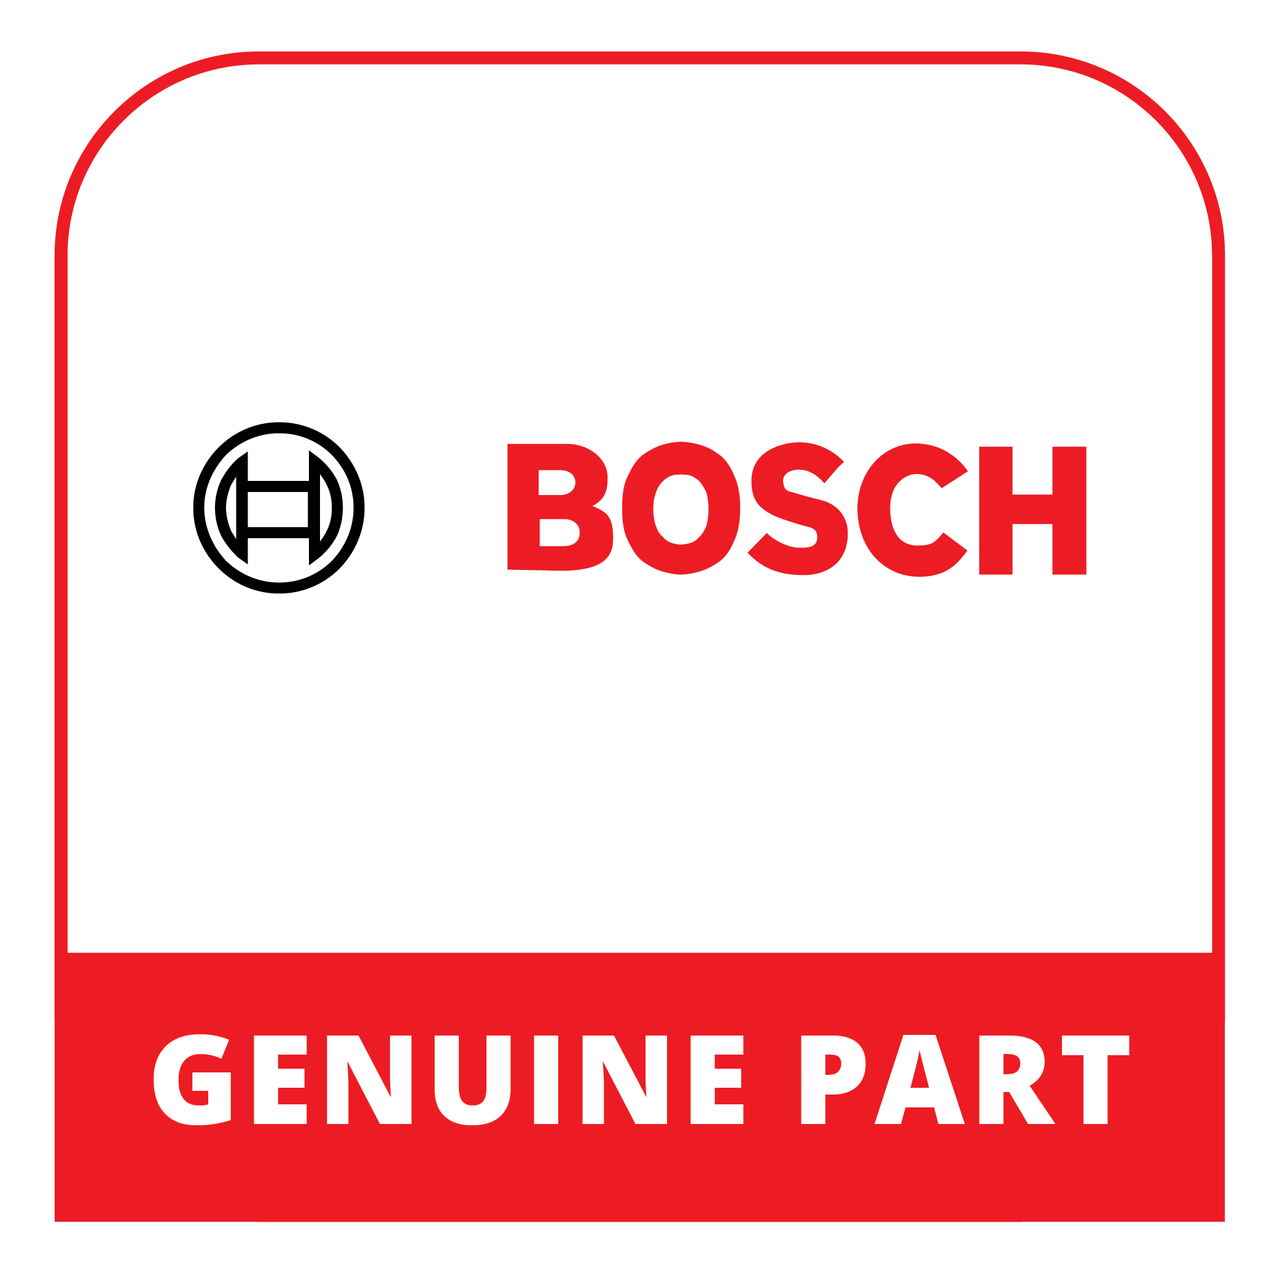 Bosch (Thermador) 00628925 - Permanent Magnet - Genuine Bosch (Thermador) Part